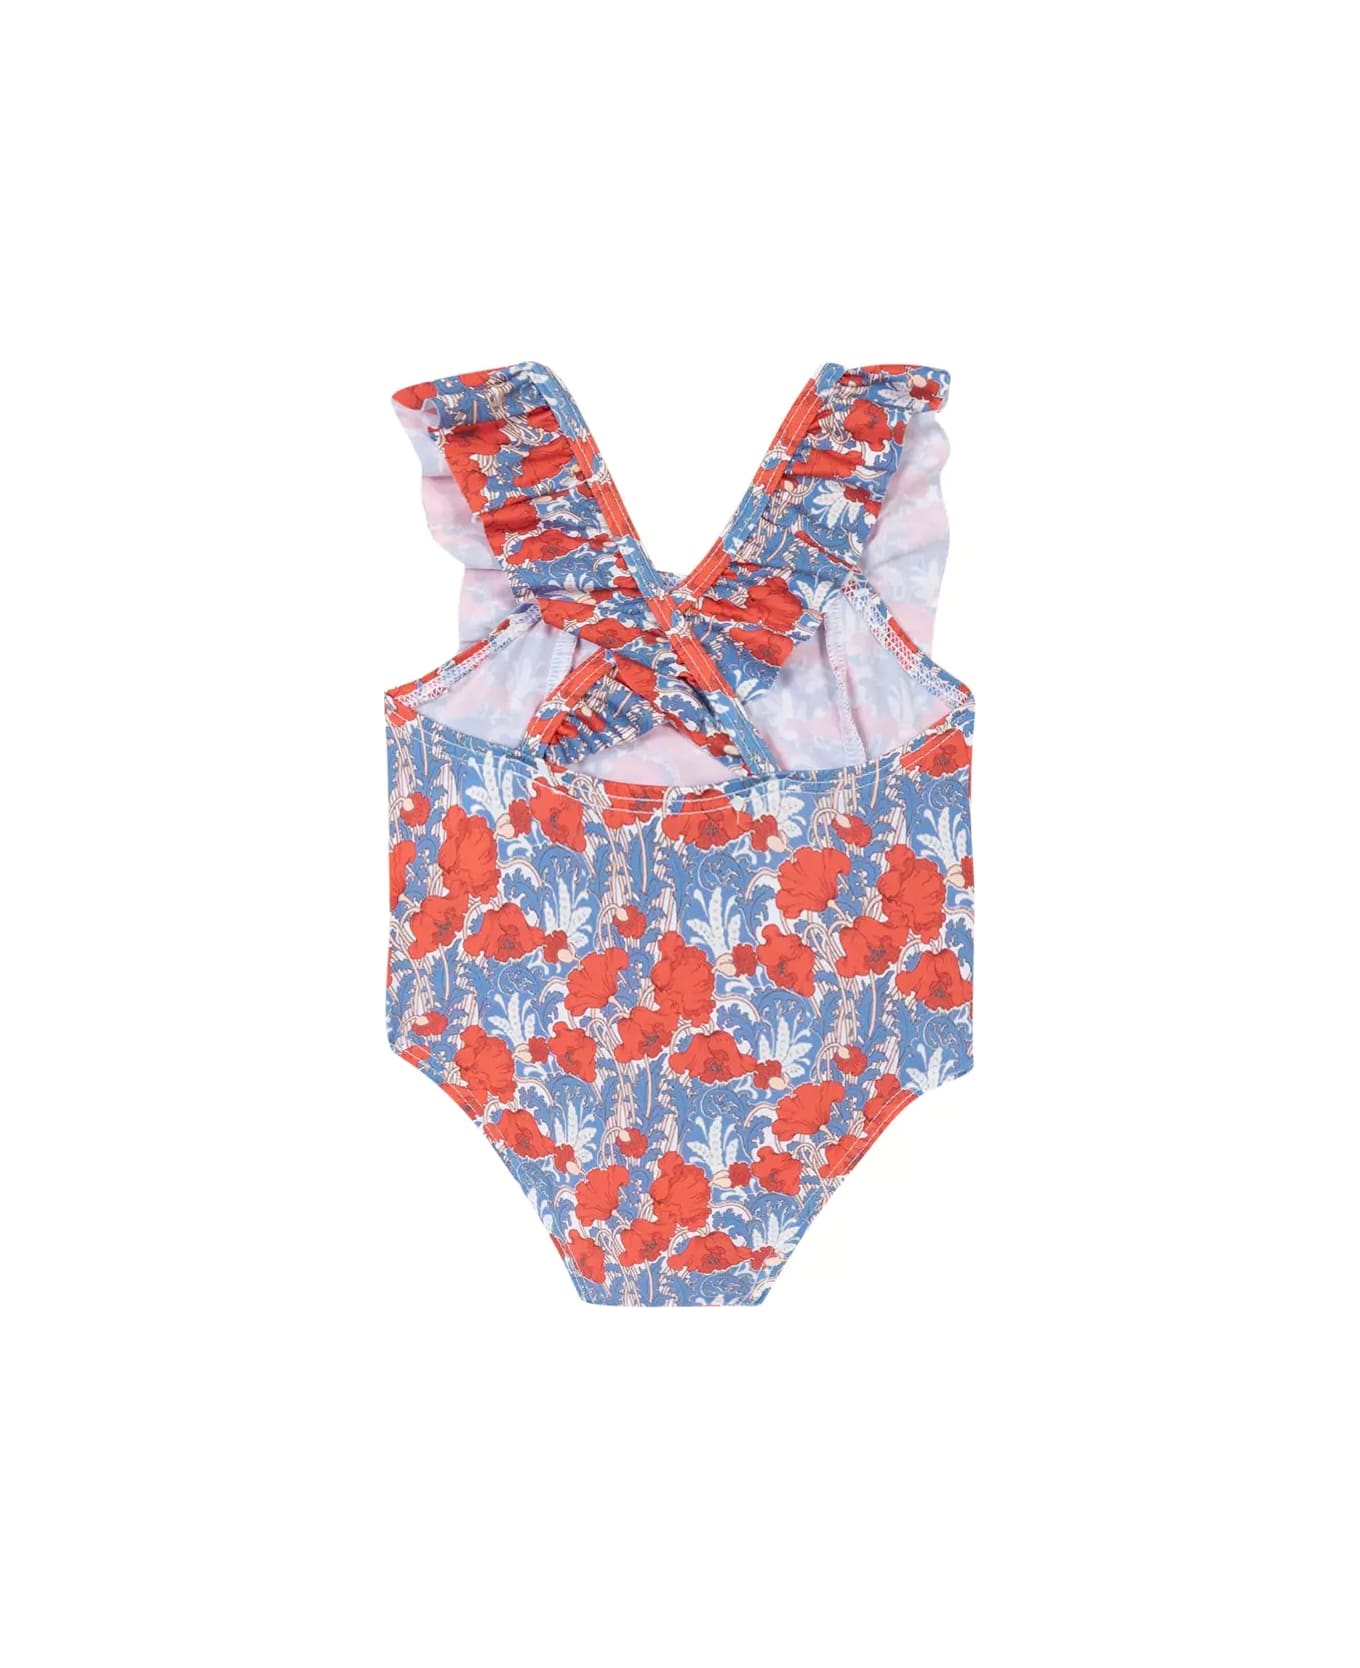 Tartine et Chocolat One-piece Swimsuit With Ruffles - Red